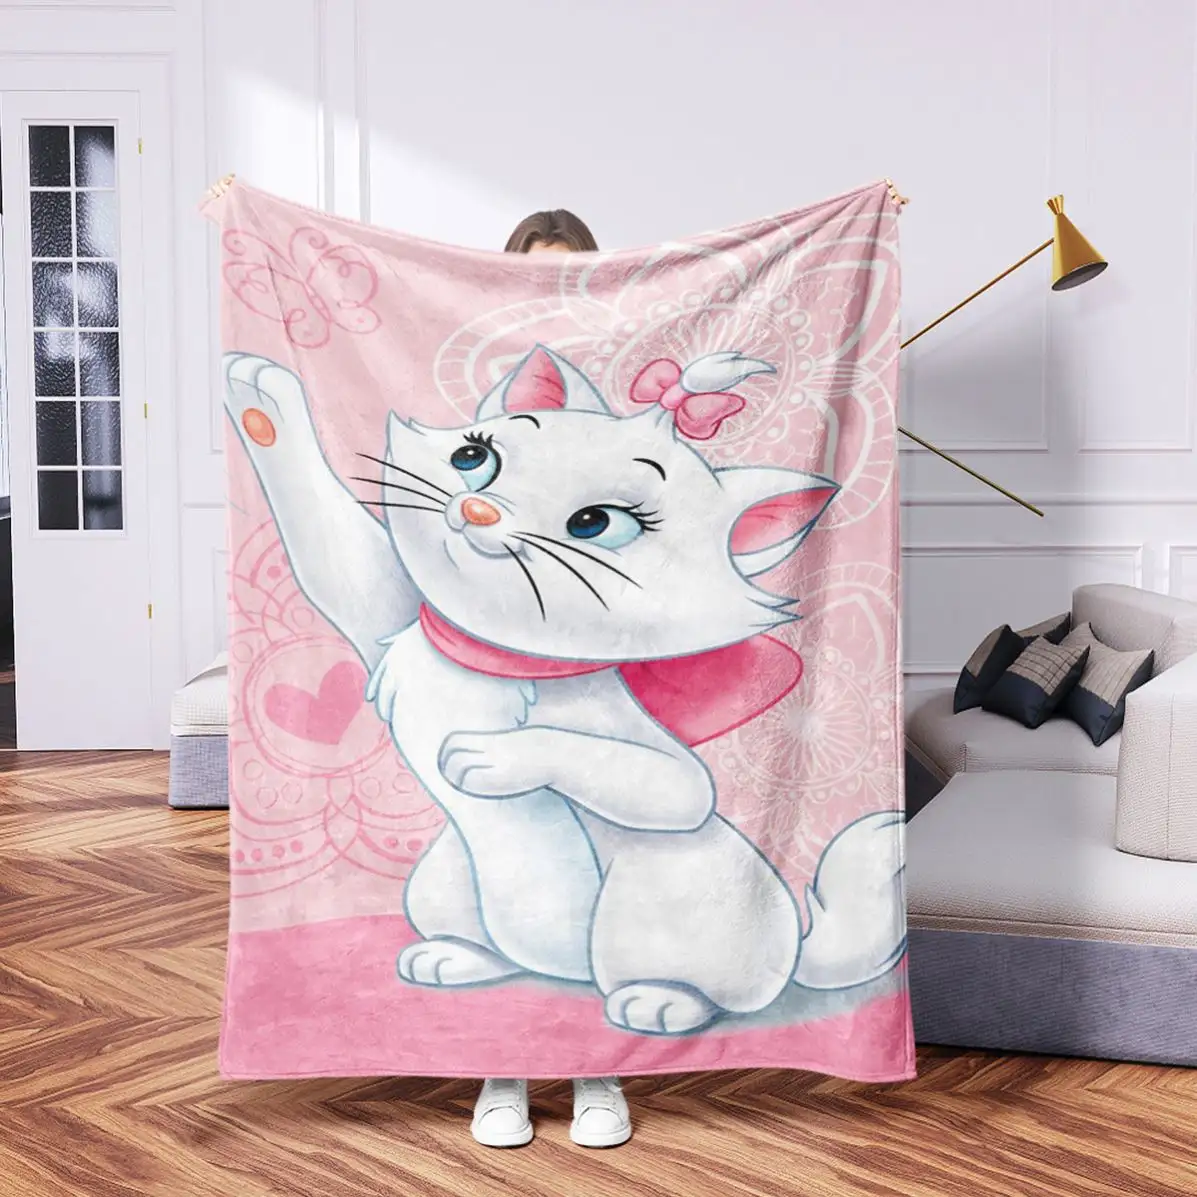 Baby Printed Blanket With White Cat Digital Flannel Sofa Bed